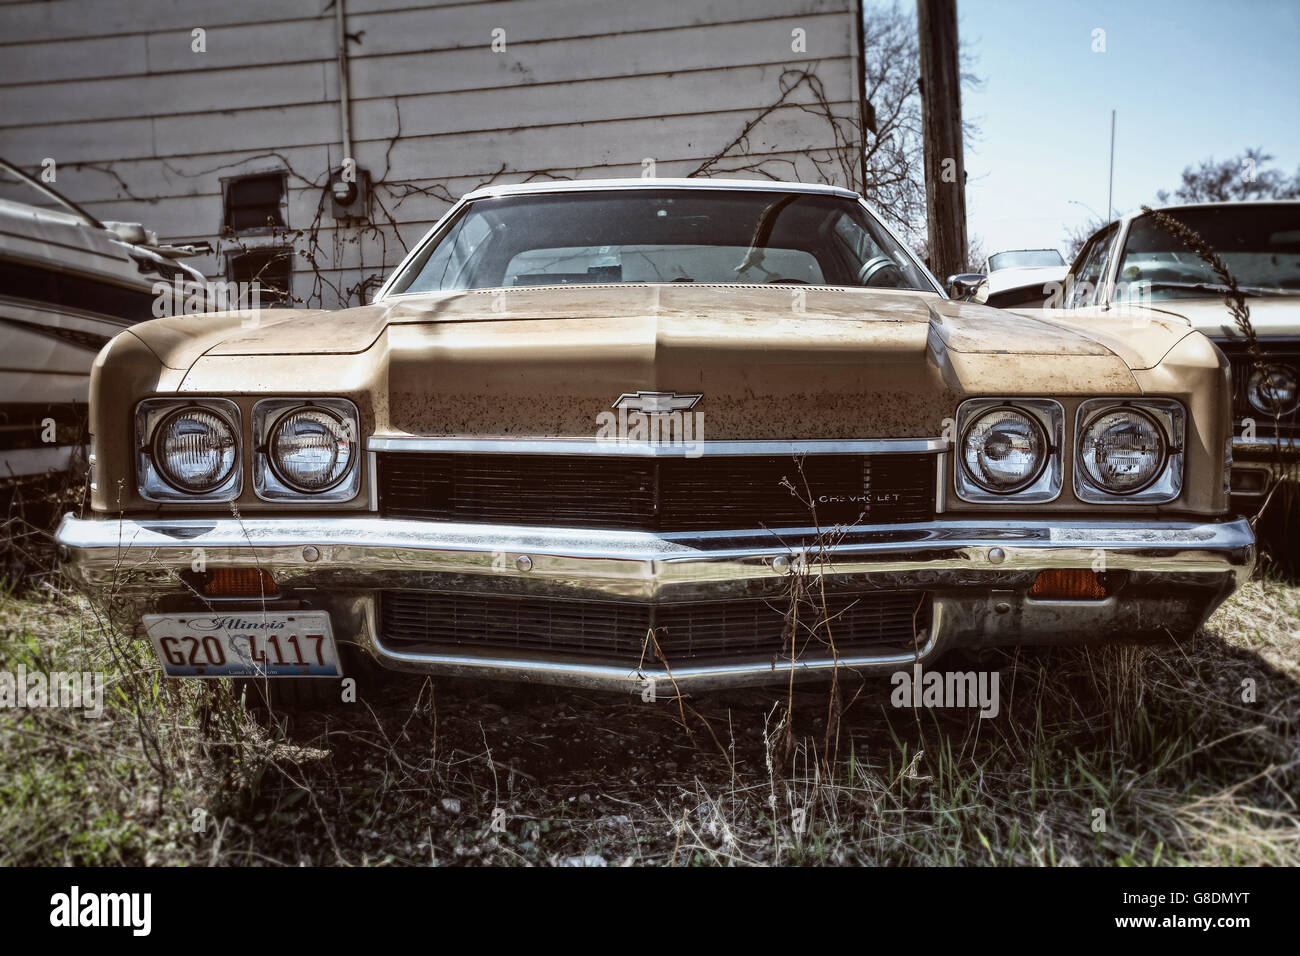 An old American Chevrolet car in a yard taken in Minneapolis, USA. Stock Photo